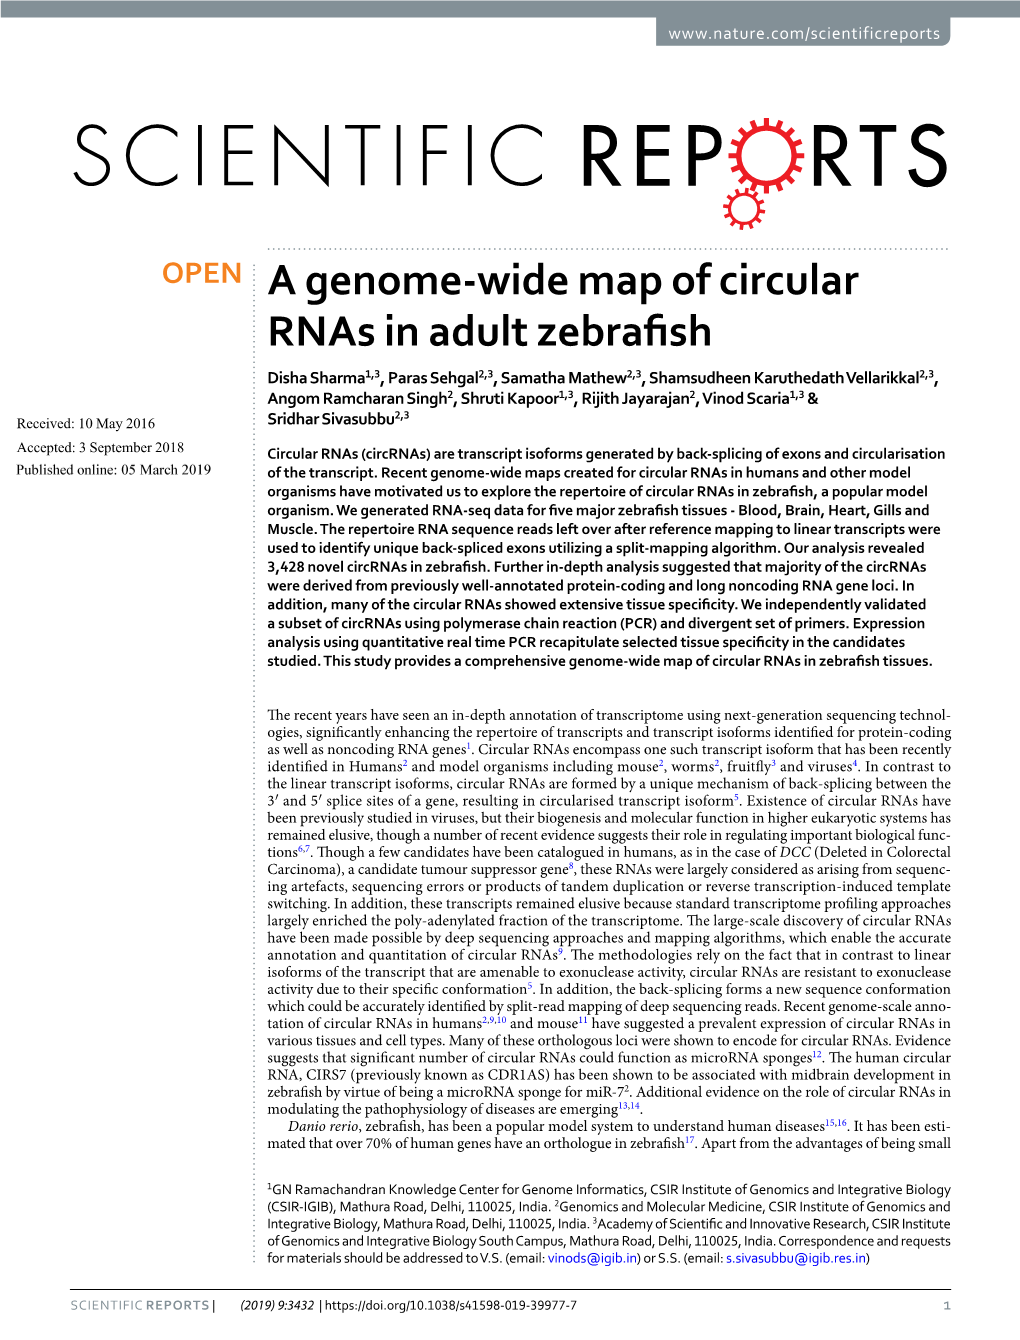 A Genome-Wide Map of Circular Rnas in Adult Zebrafish